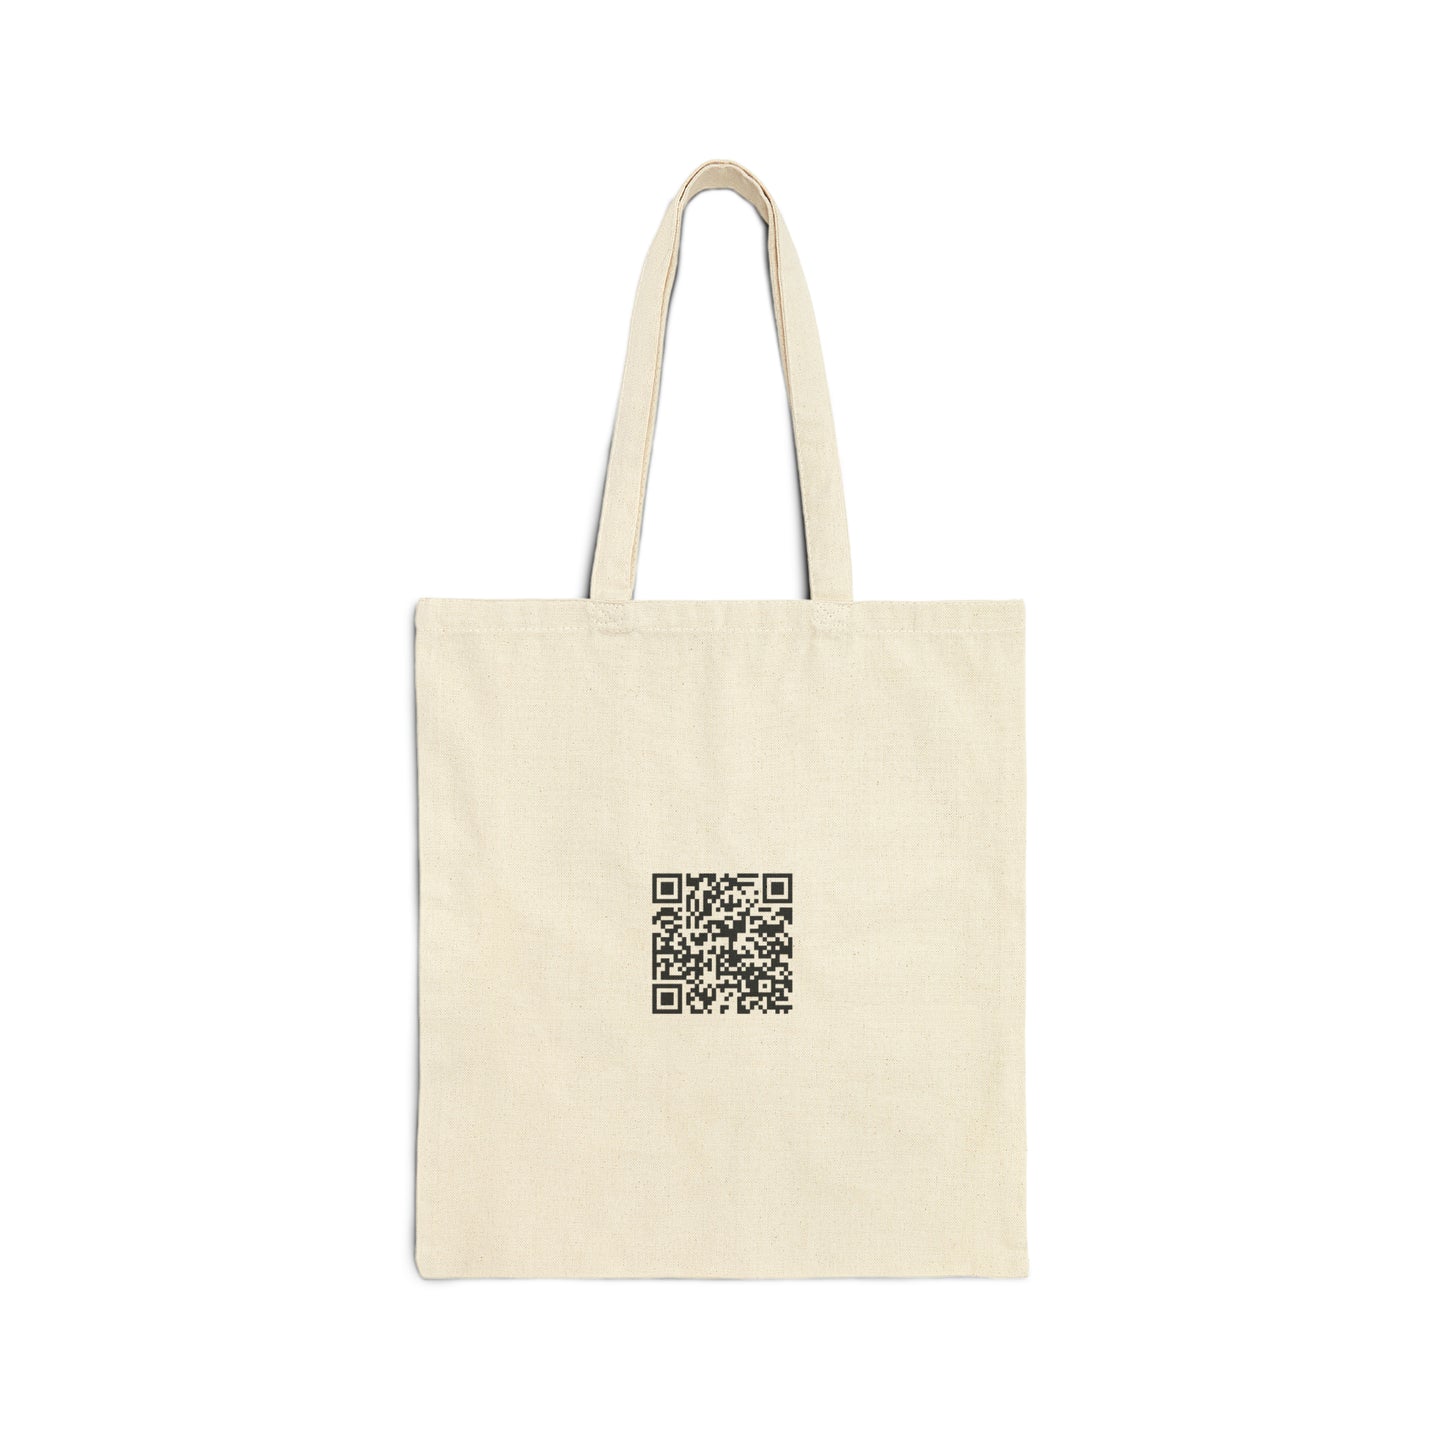 The Fourth Reich - Cotton Canvas Tote Bag